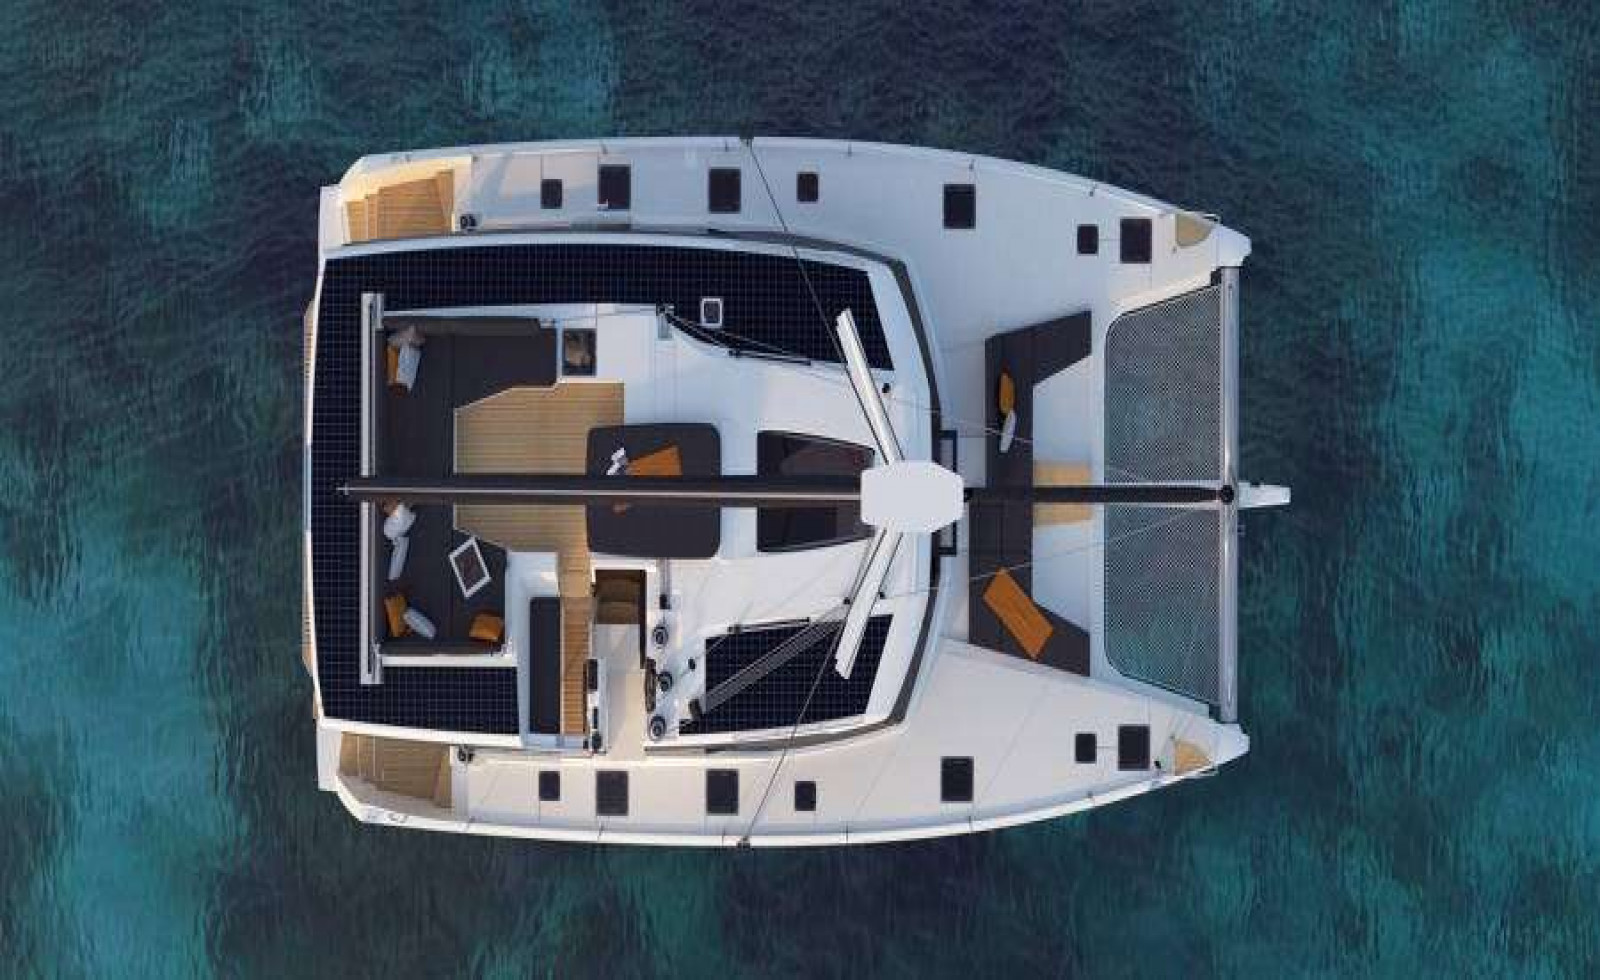 Fountaine Pajot reveals the first images of the New 51